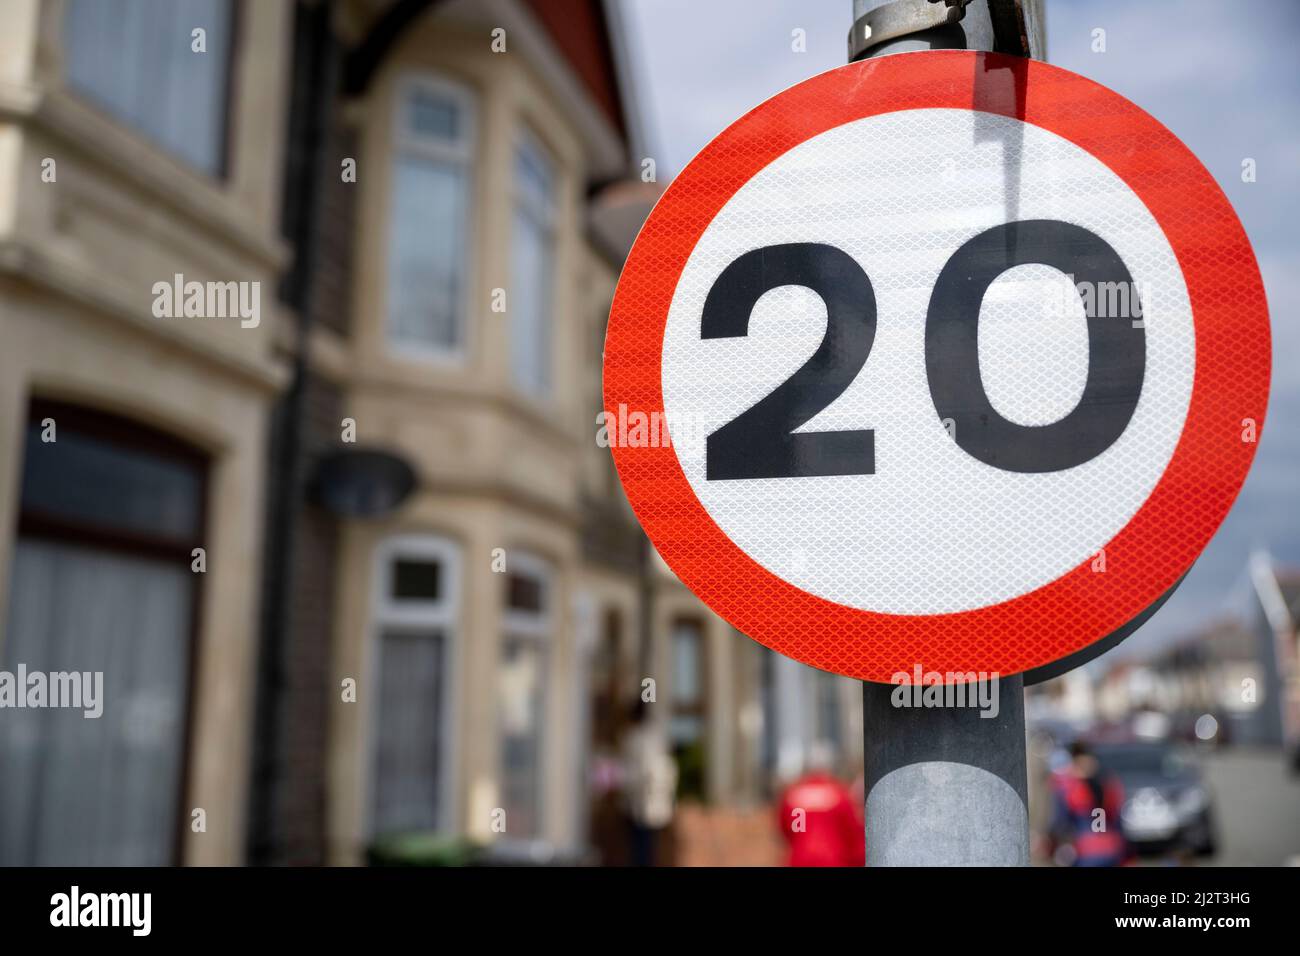 A 20mph speed sign in a residential area in Cardiff, Wales, United Kingdom. Stock Photo